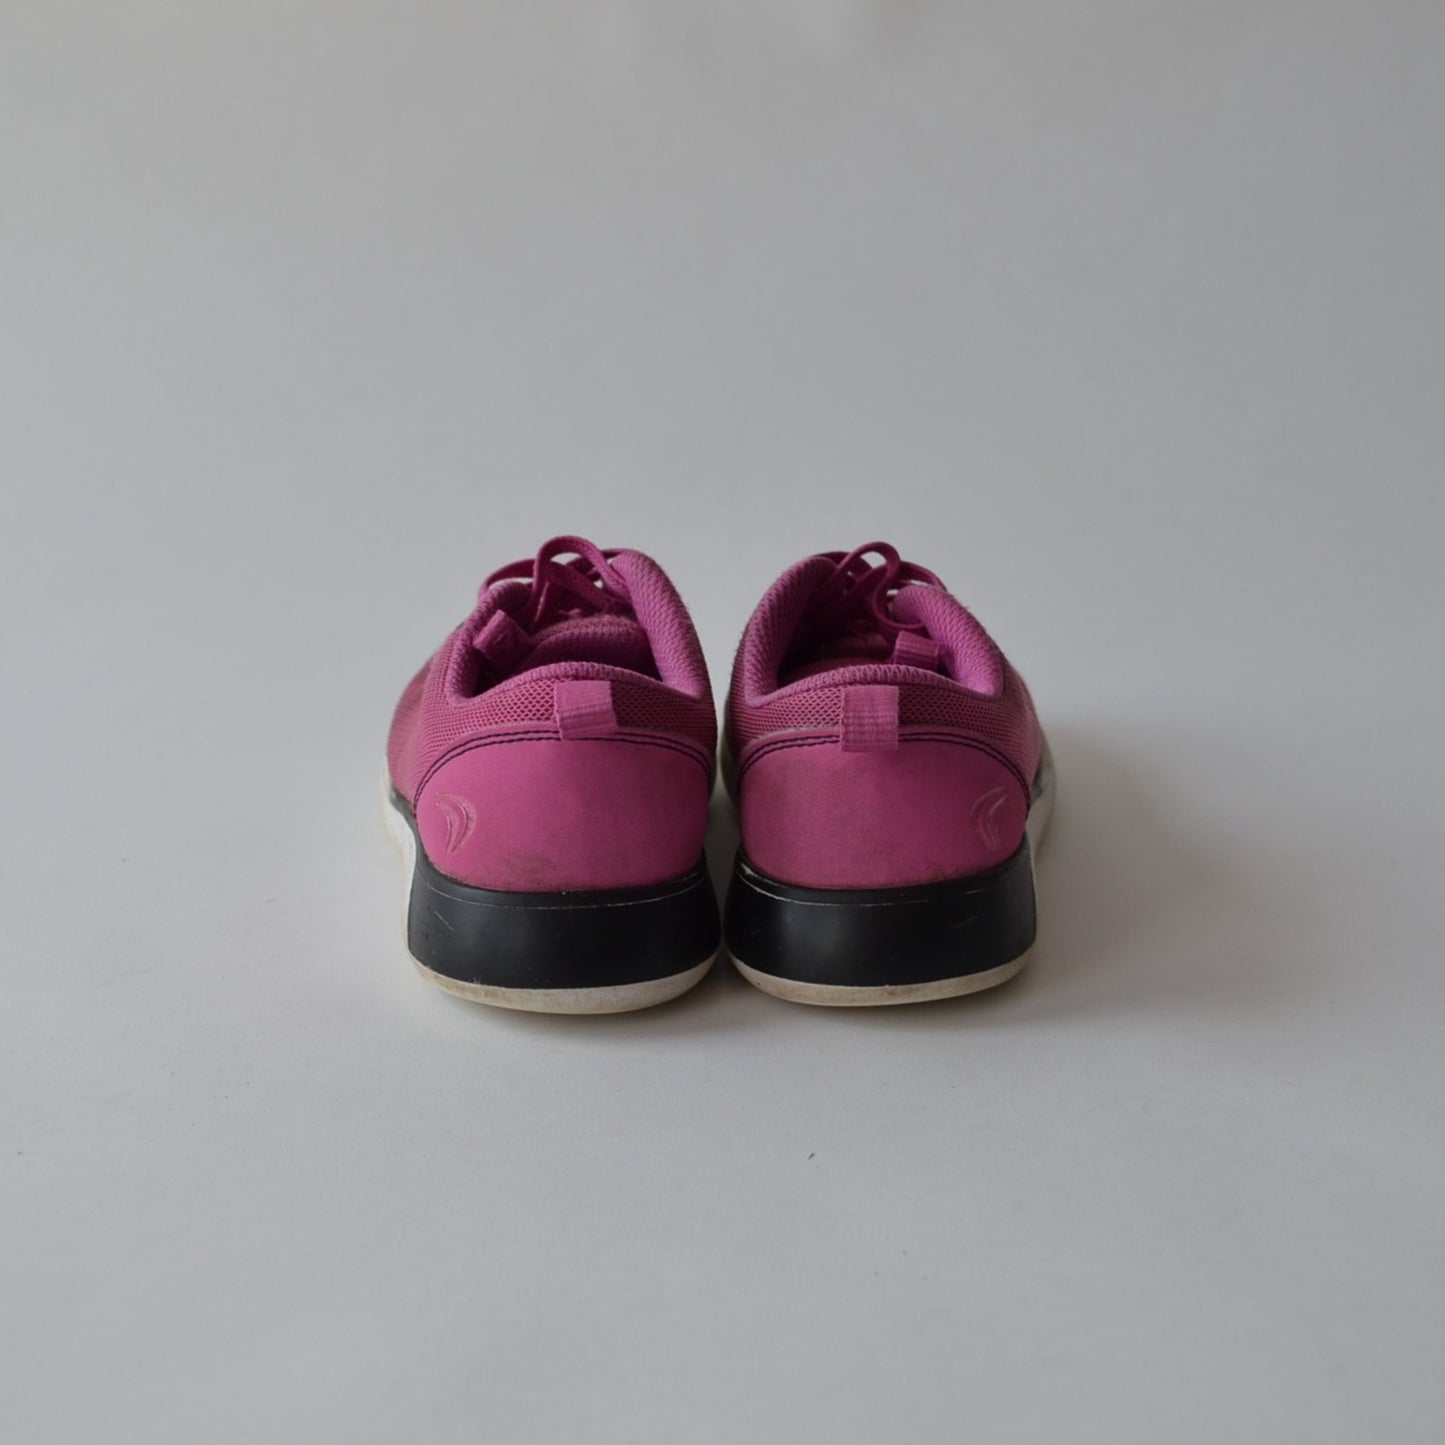 Trainers - Pink - Shoe Size 1.5